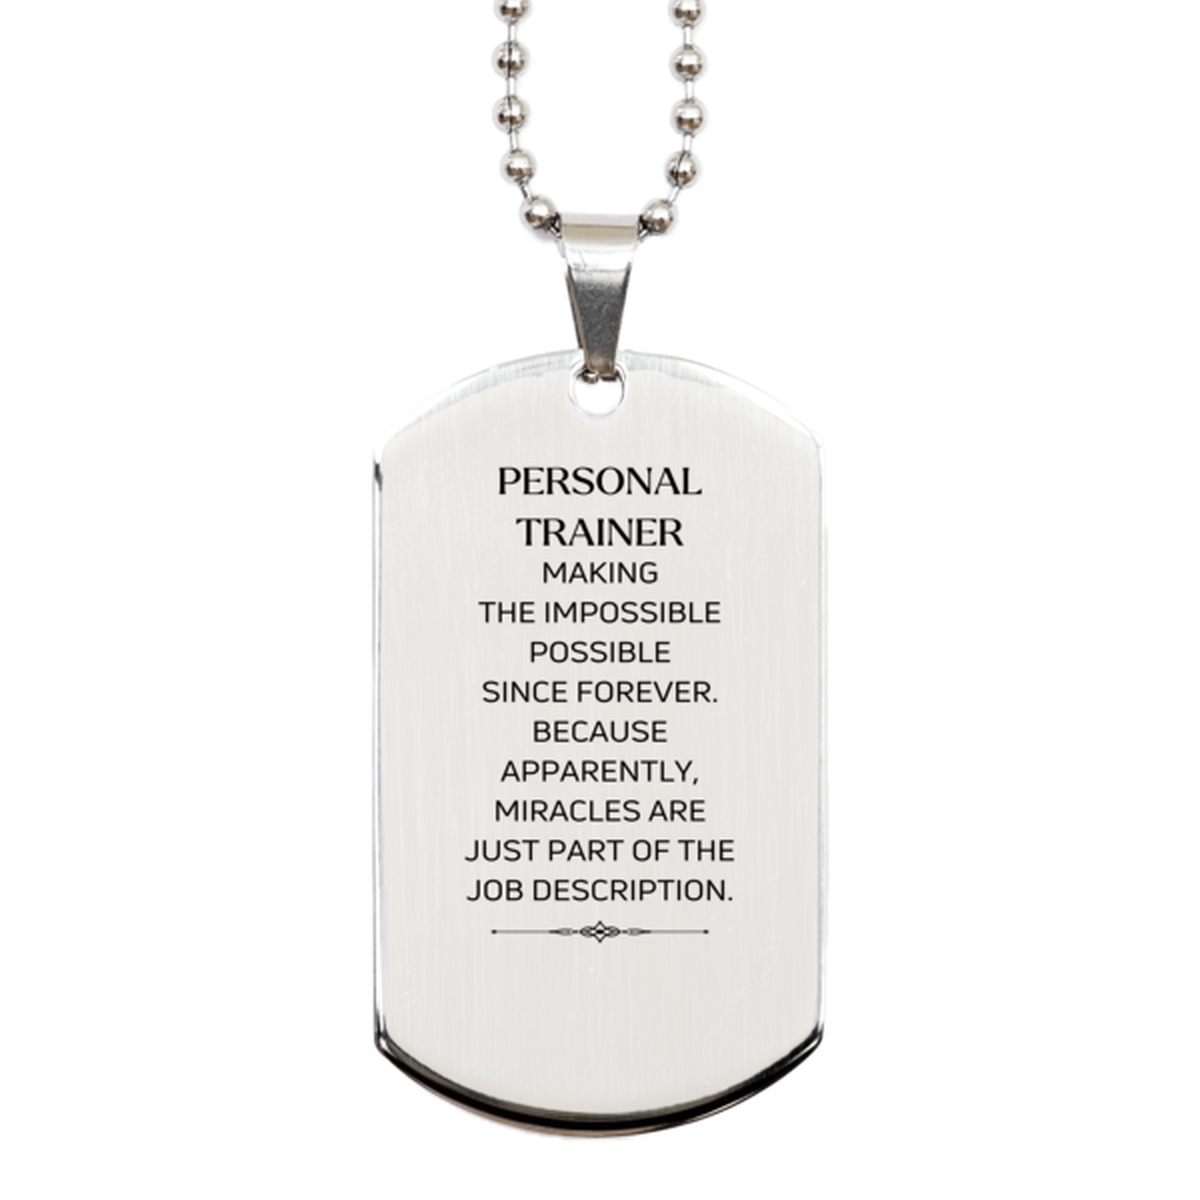 Funny Personal Trainer Gifts, Miracles are just part of the job description, Inspirational Birthday Silver Dog Tag For Personal Trainer, Men, Women, Coworkers, Friends, Boss